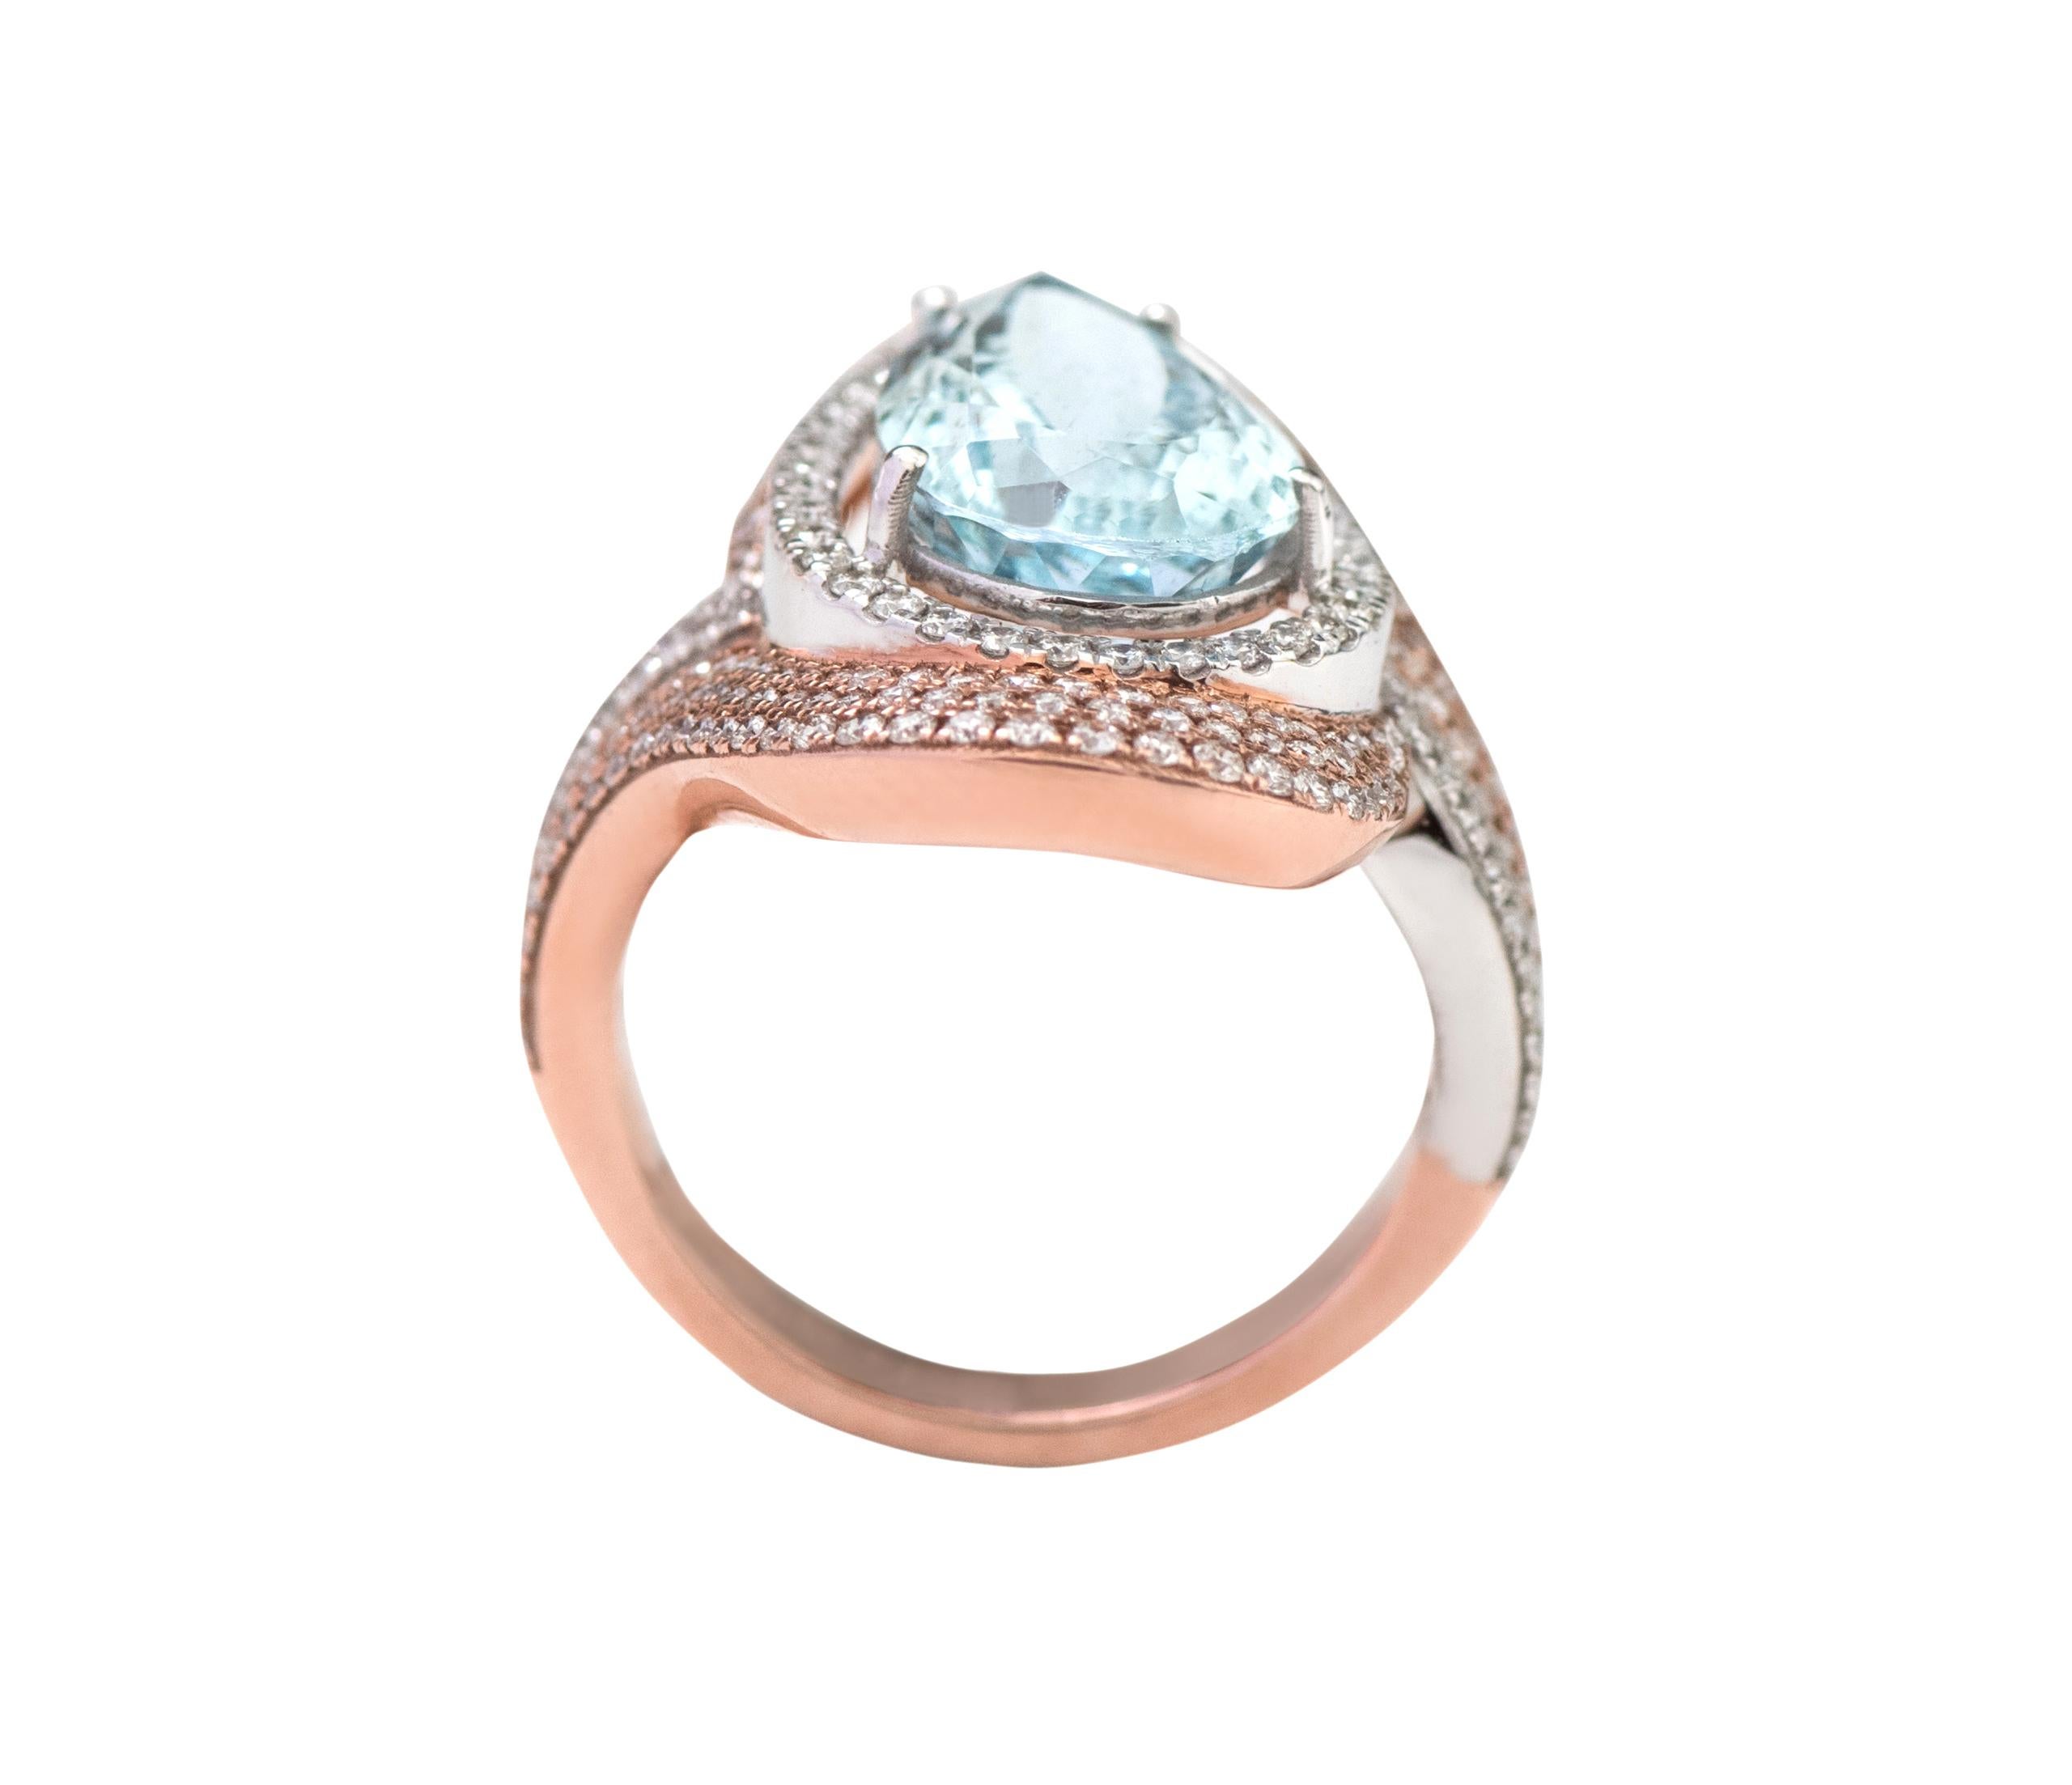 18 Karat Gold 5.15 Carat Pear-Cut Aquamarine and Diamond Cocktail Statement Ring In New Condition For Sale In Jaipur, IN